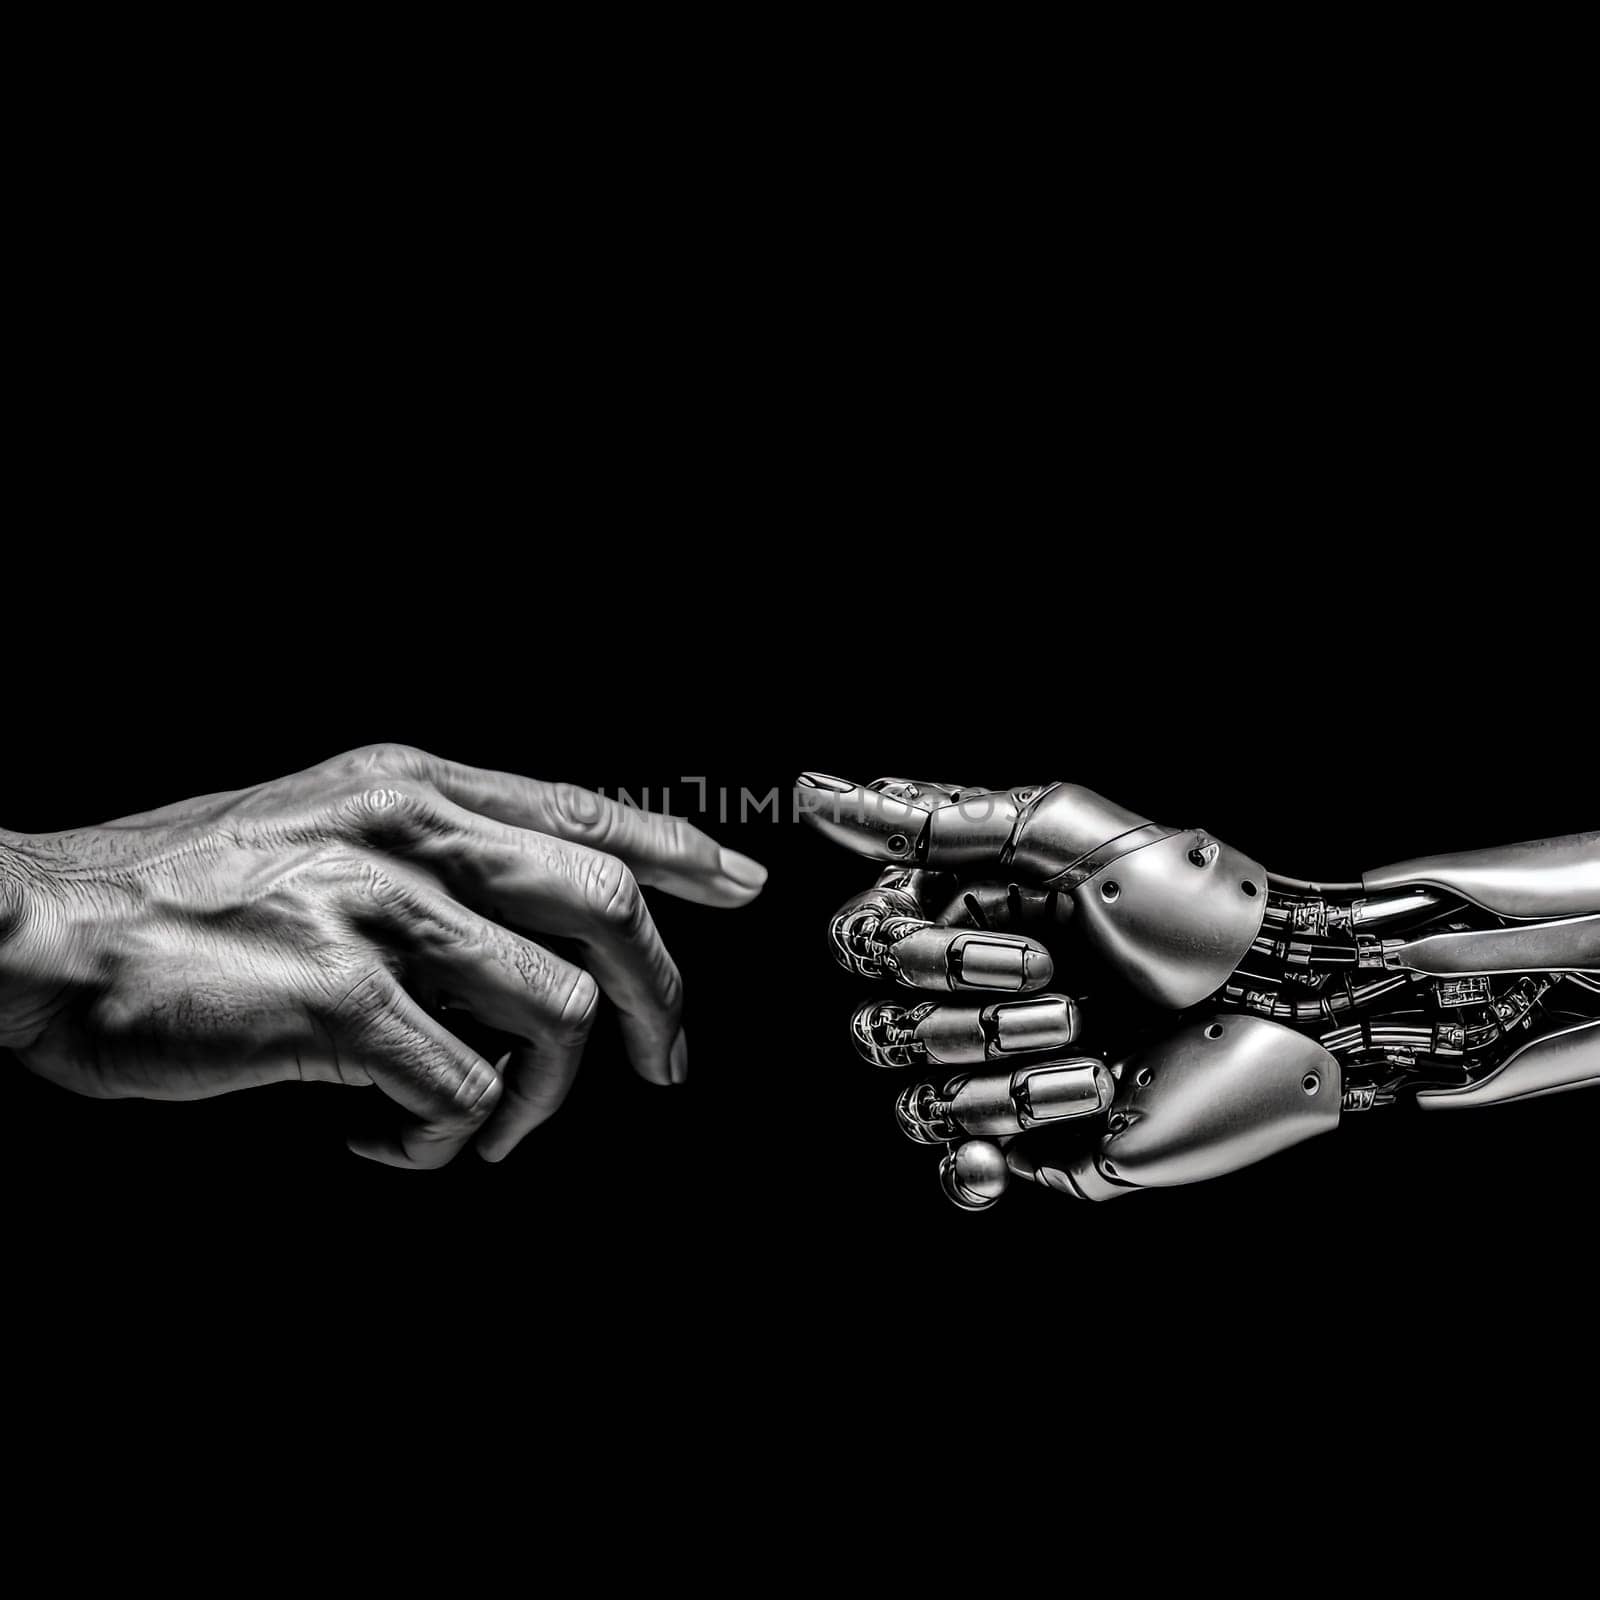 Two robotic hands are depicted touching each other by Alla_Morozova93